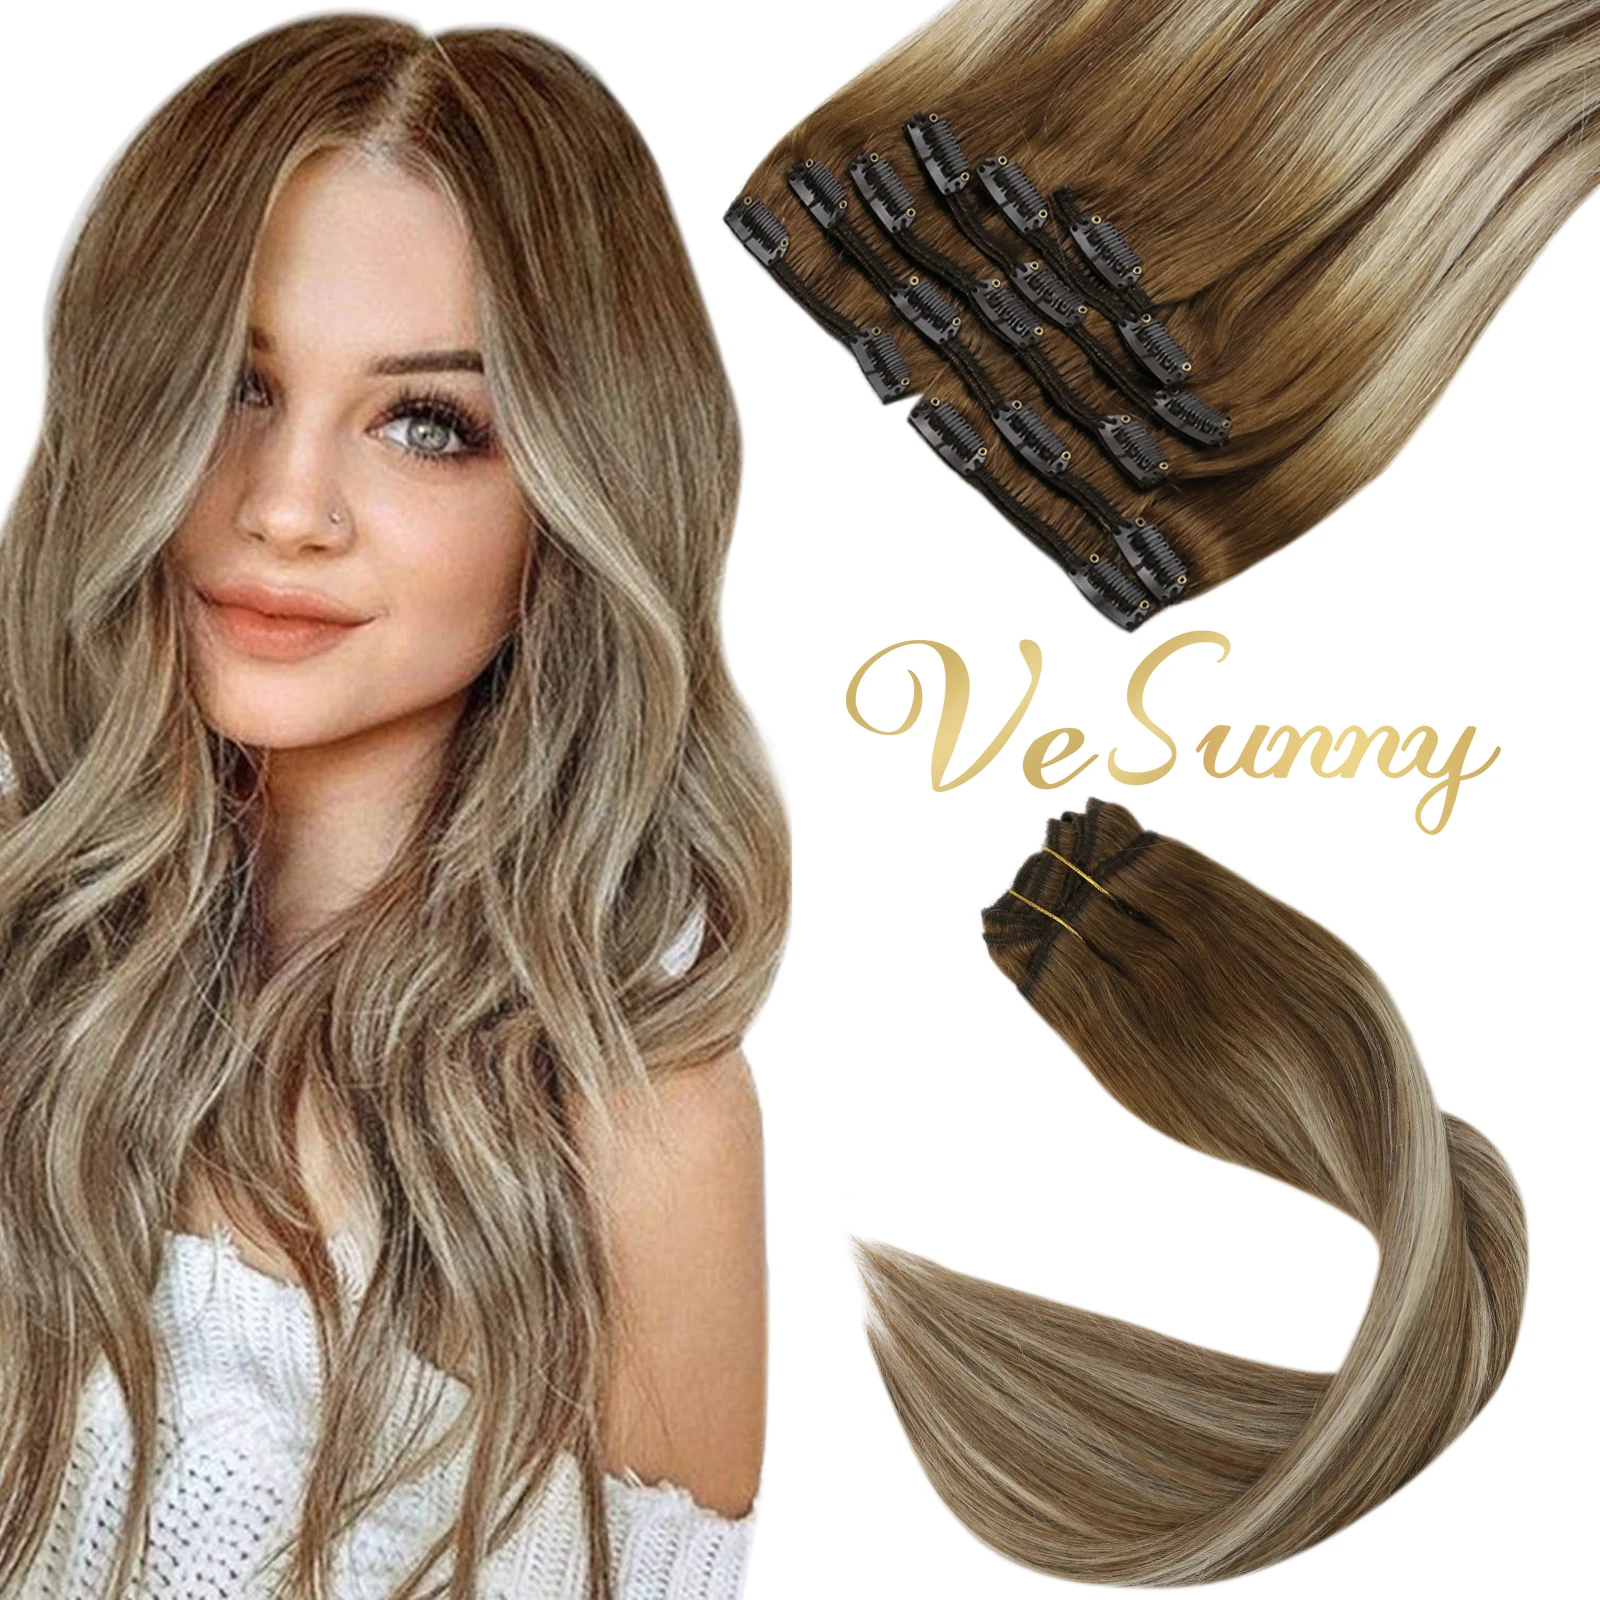 VeSunny Double Weft Clip in Hair Extensions Real Human Hair 7pcs 120gr Clip Hair Balayage Medium Brown Highlights Blonde Toupet